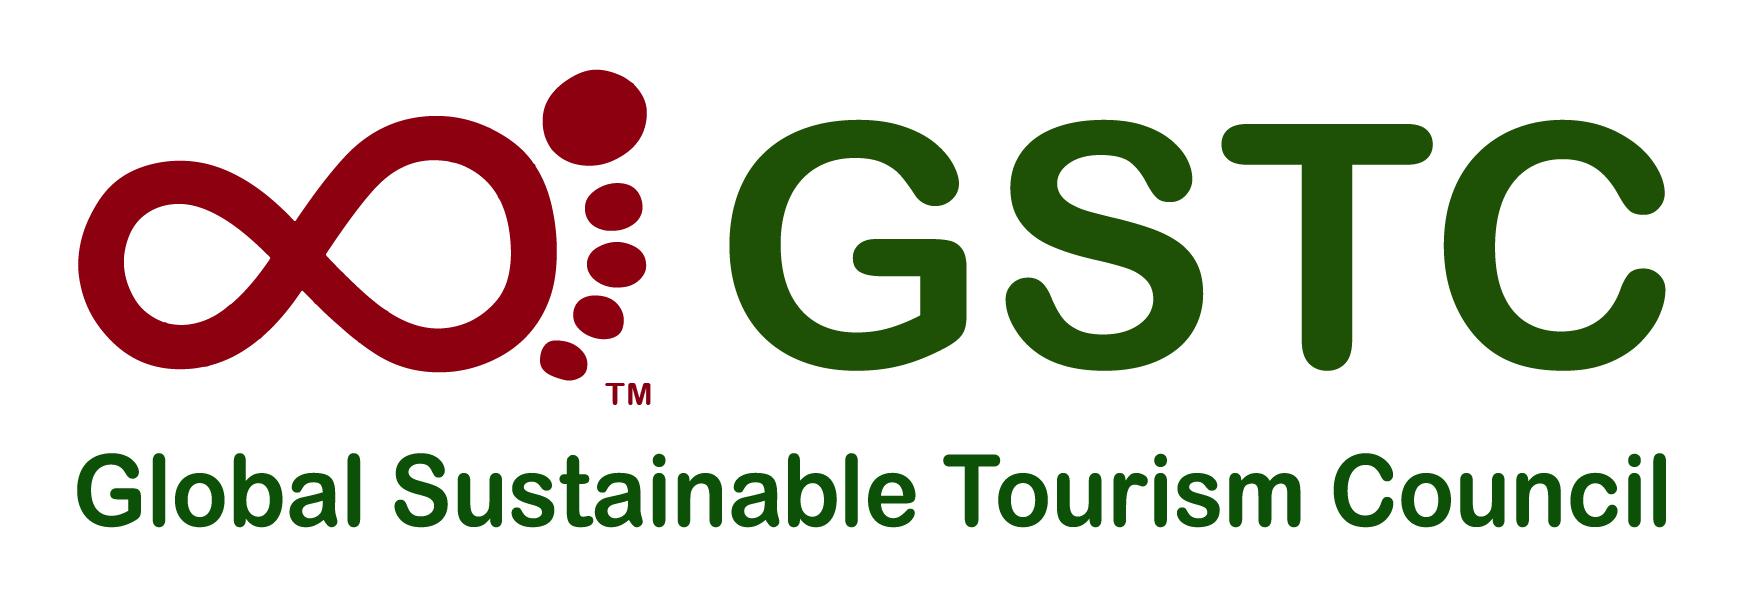 Americas - Global Sustainable Tourism Council (GSTC)